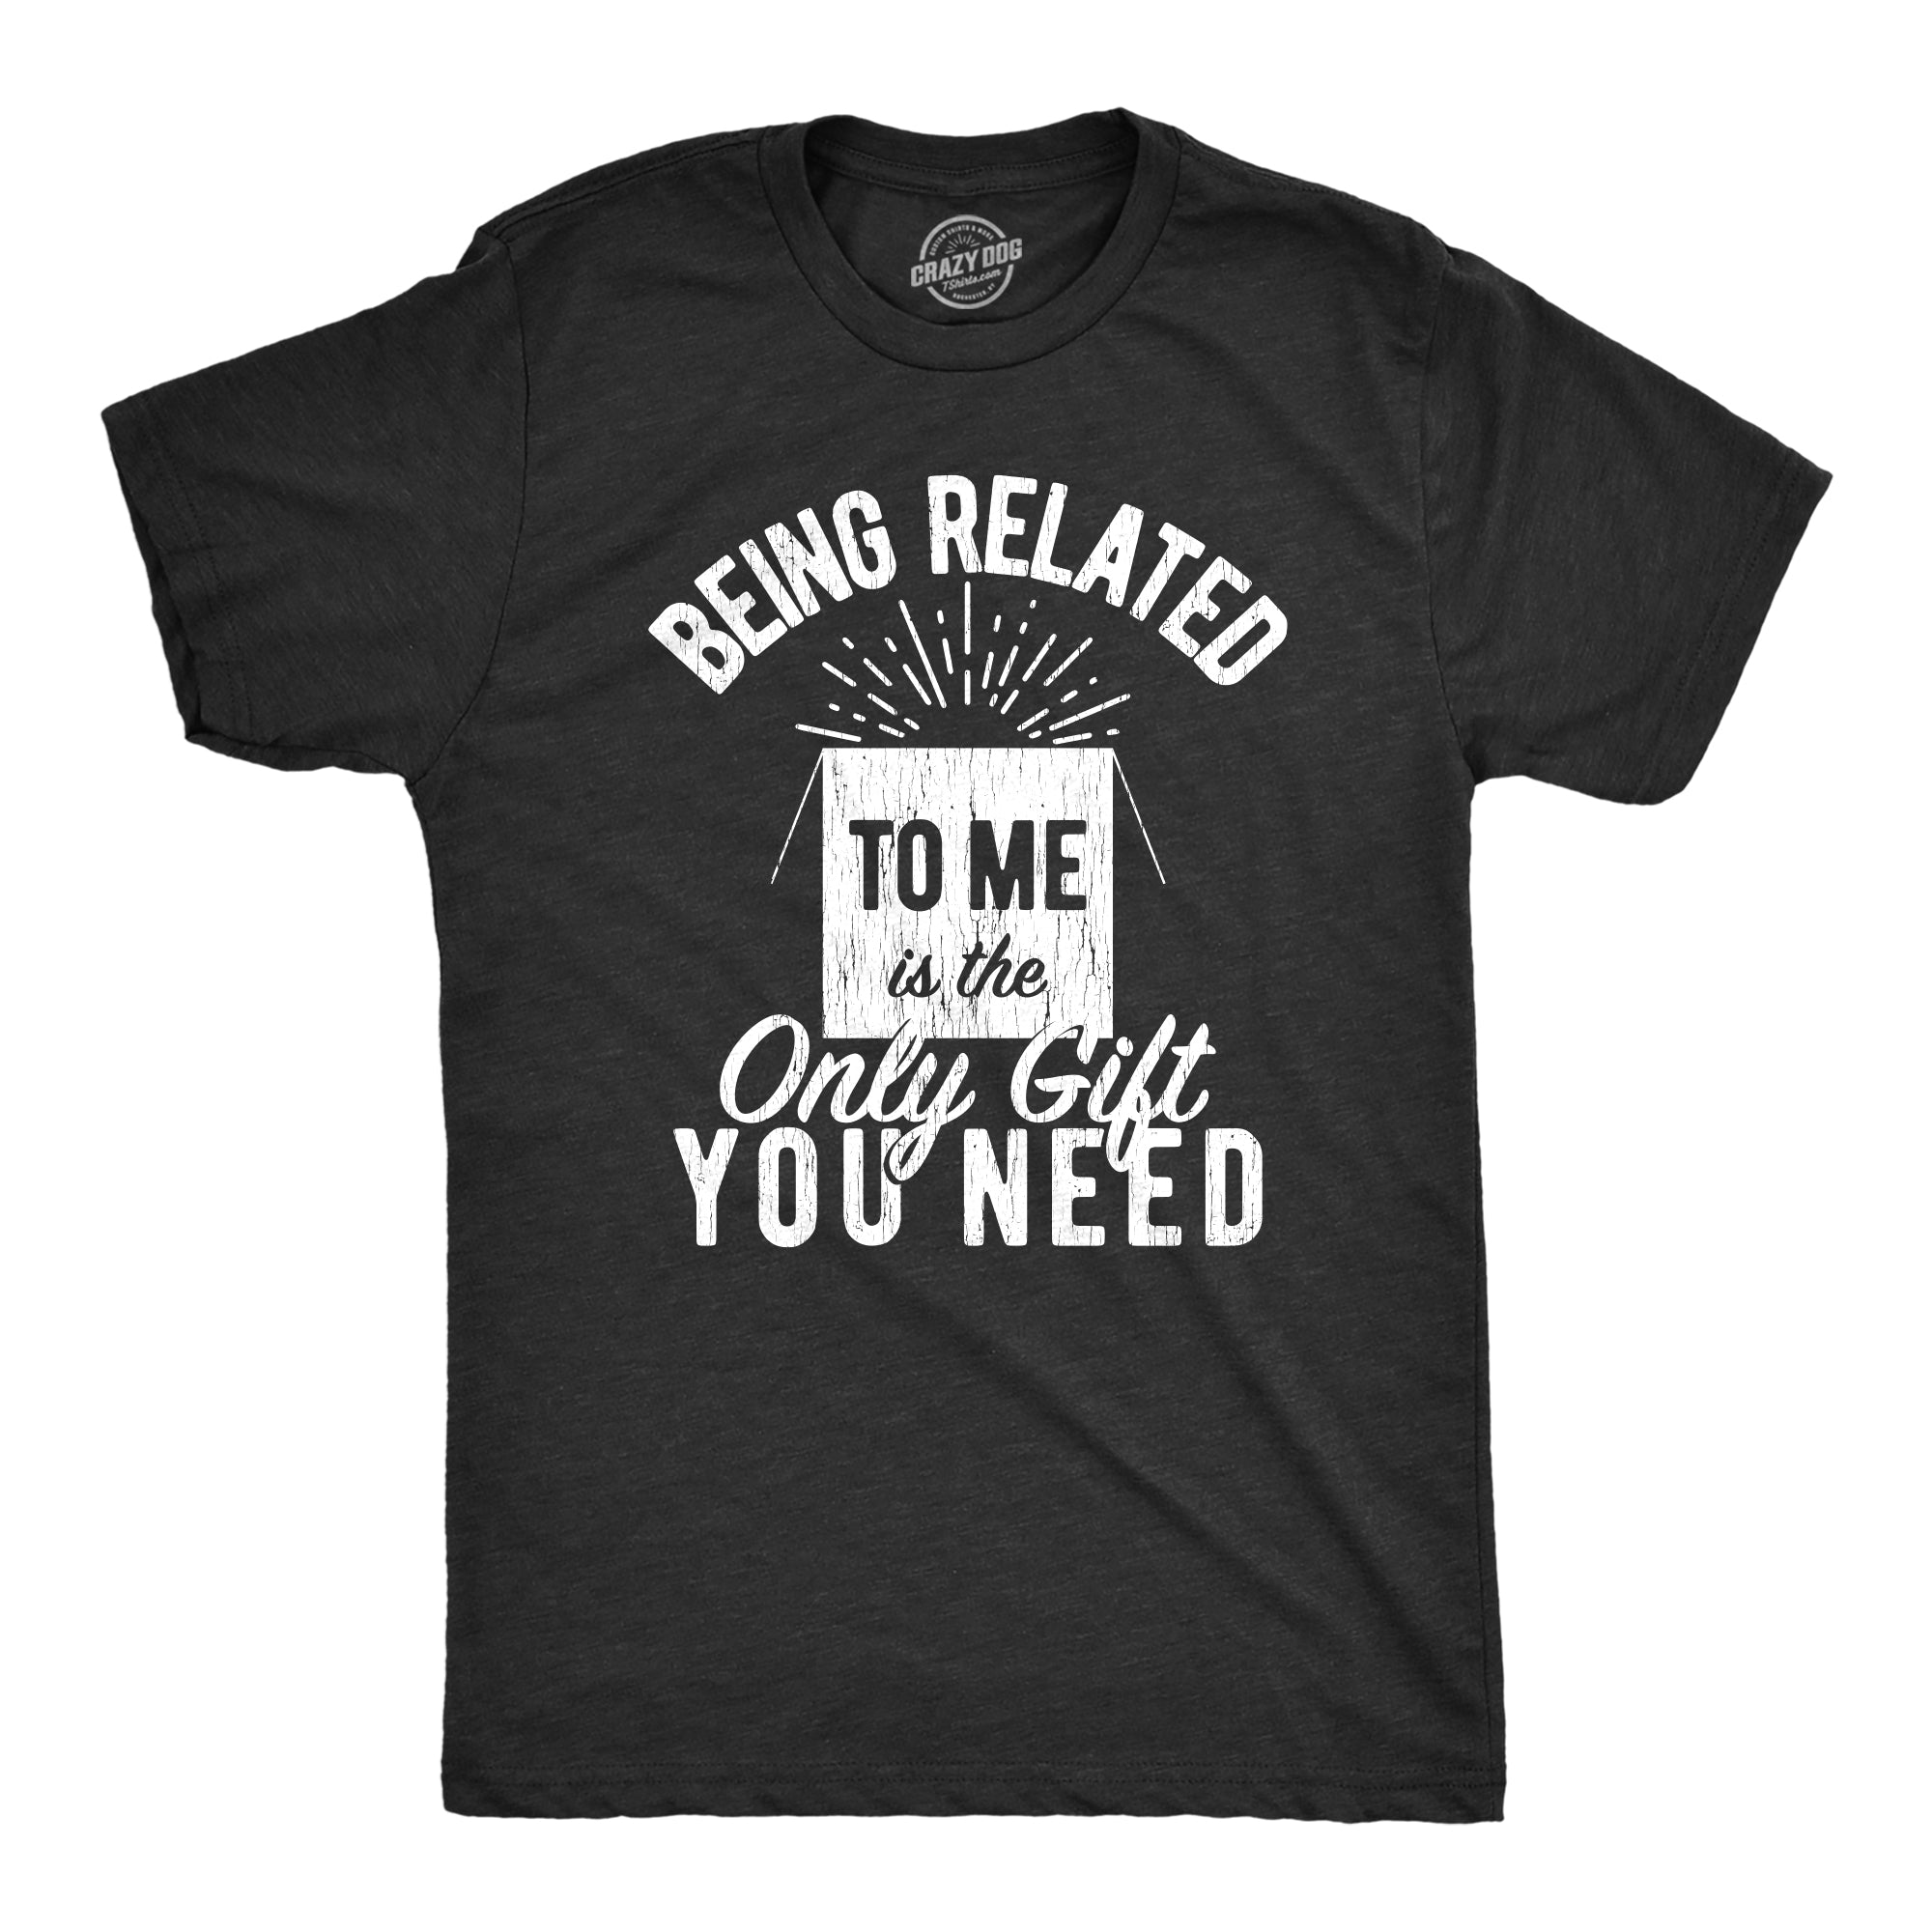 Funny Heather Black Being Related To Me Is The Only Gift You Need Mens T Shirt Nerdy Christmas Tee